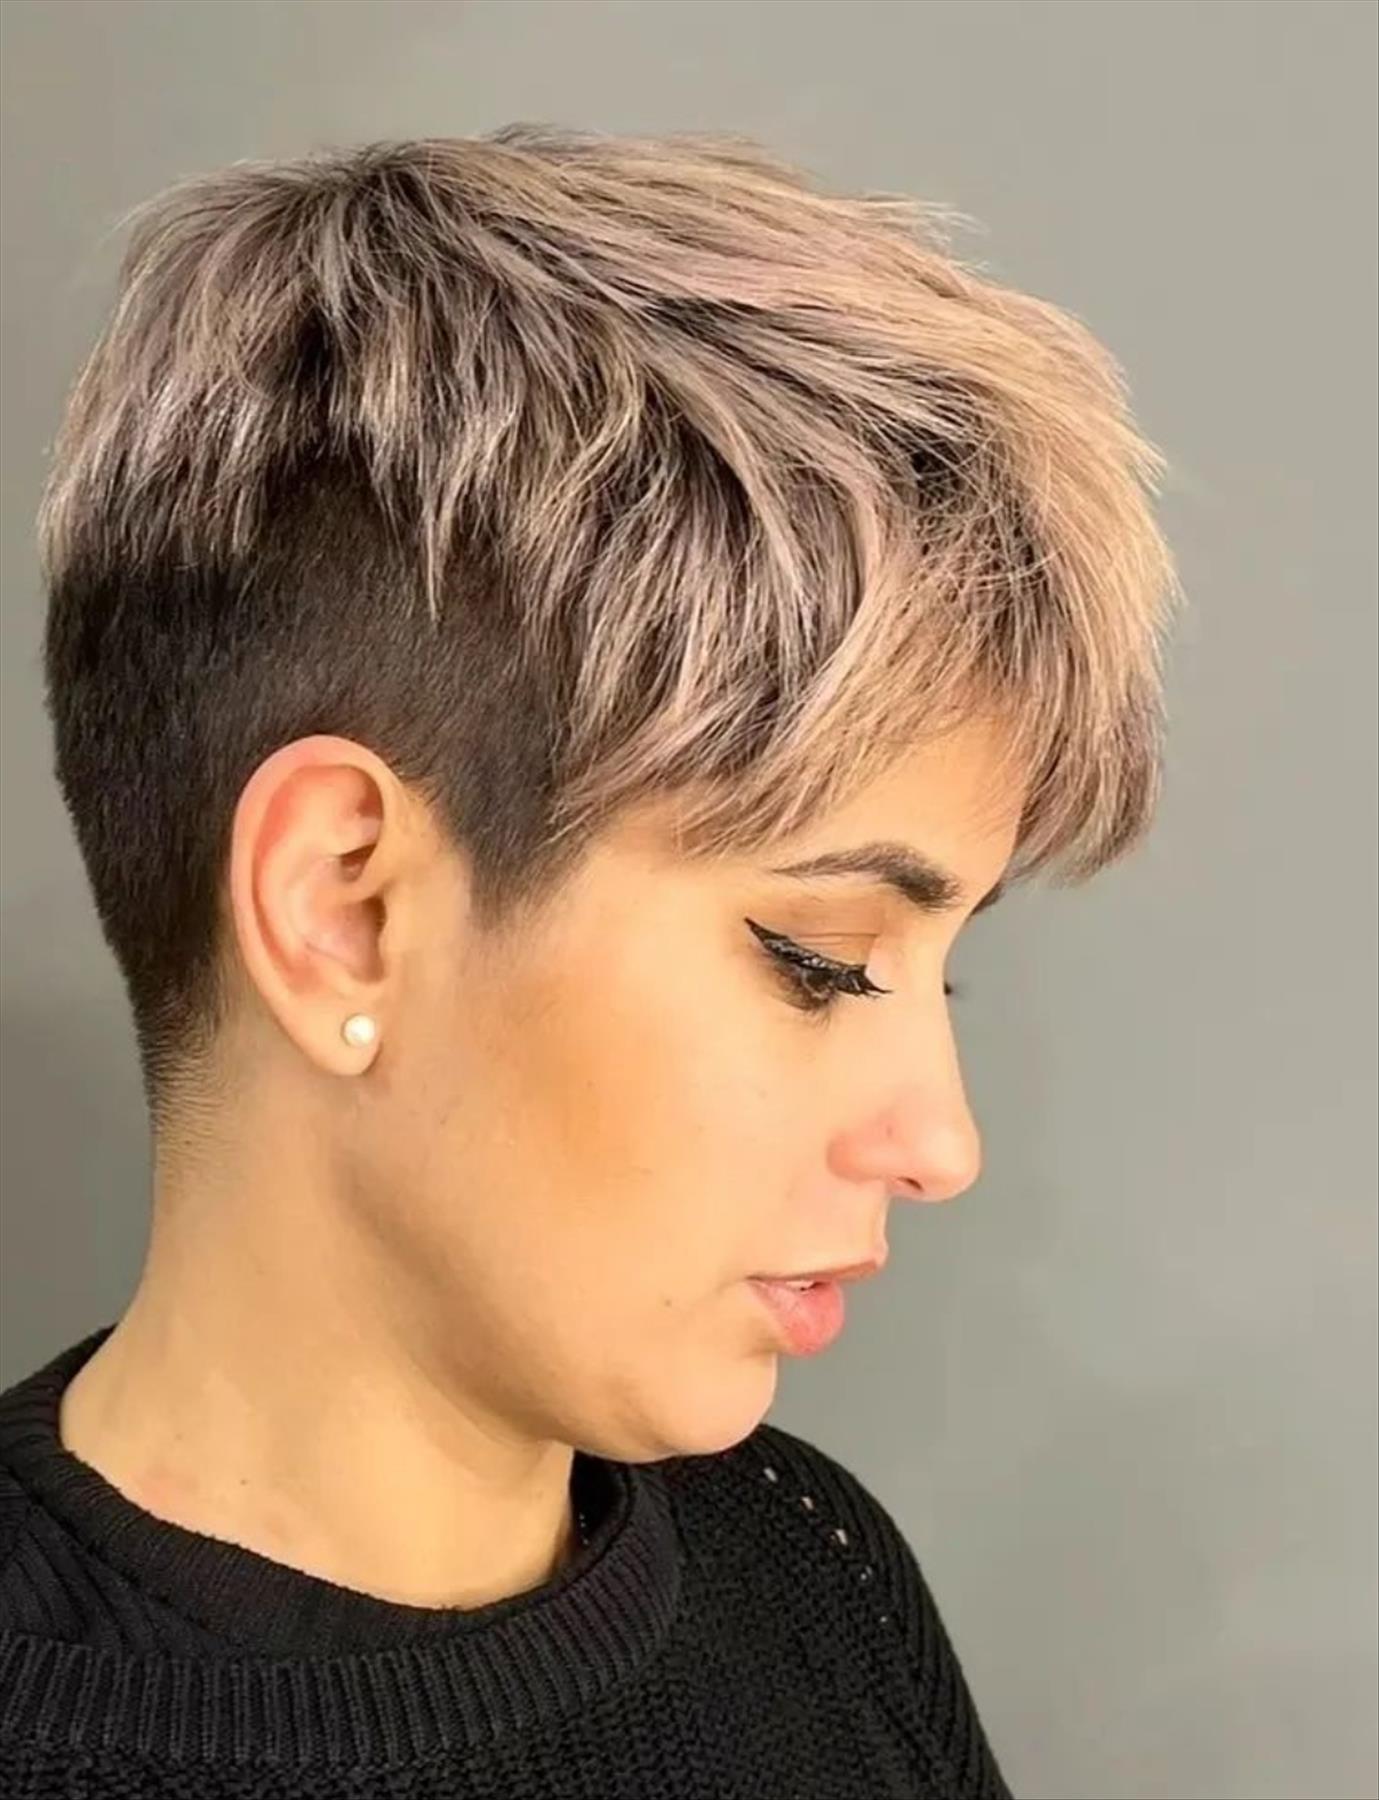 Stylish Short Undercut Shaved Hairstyles for Cool Women